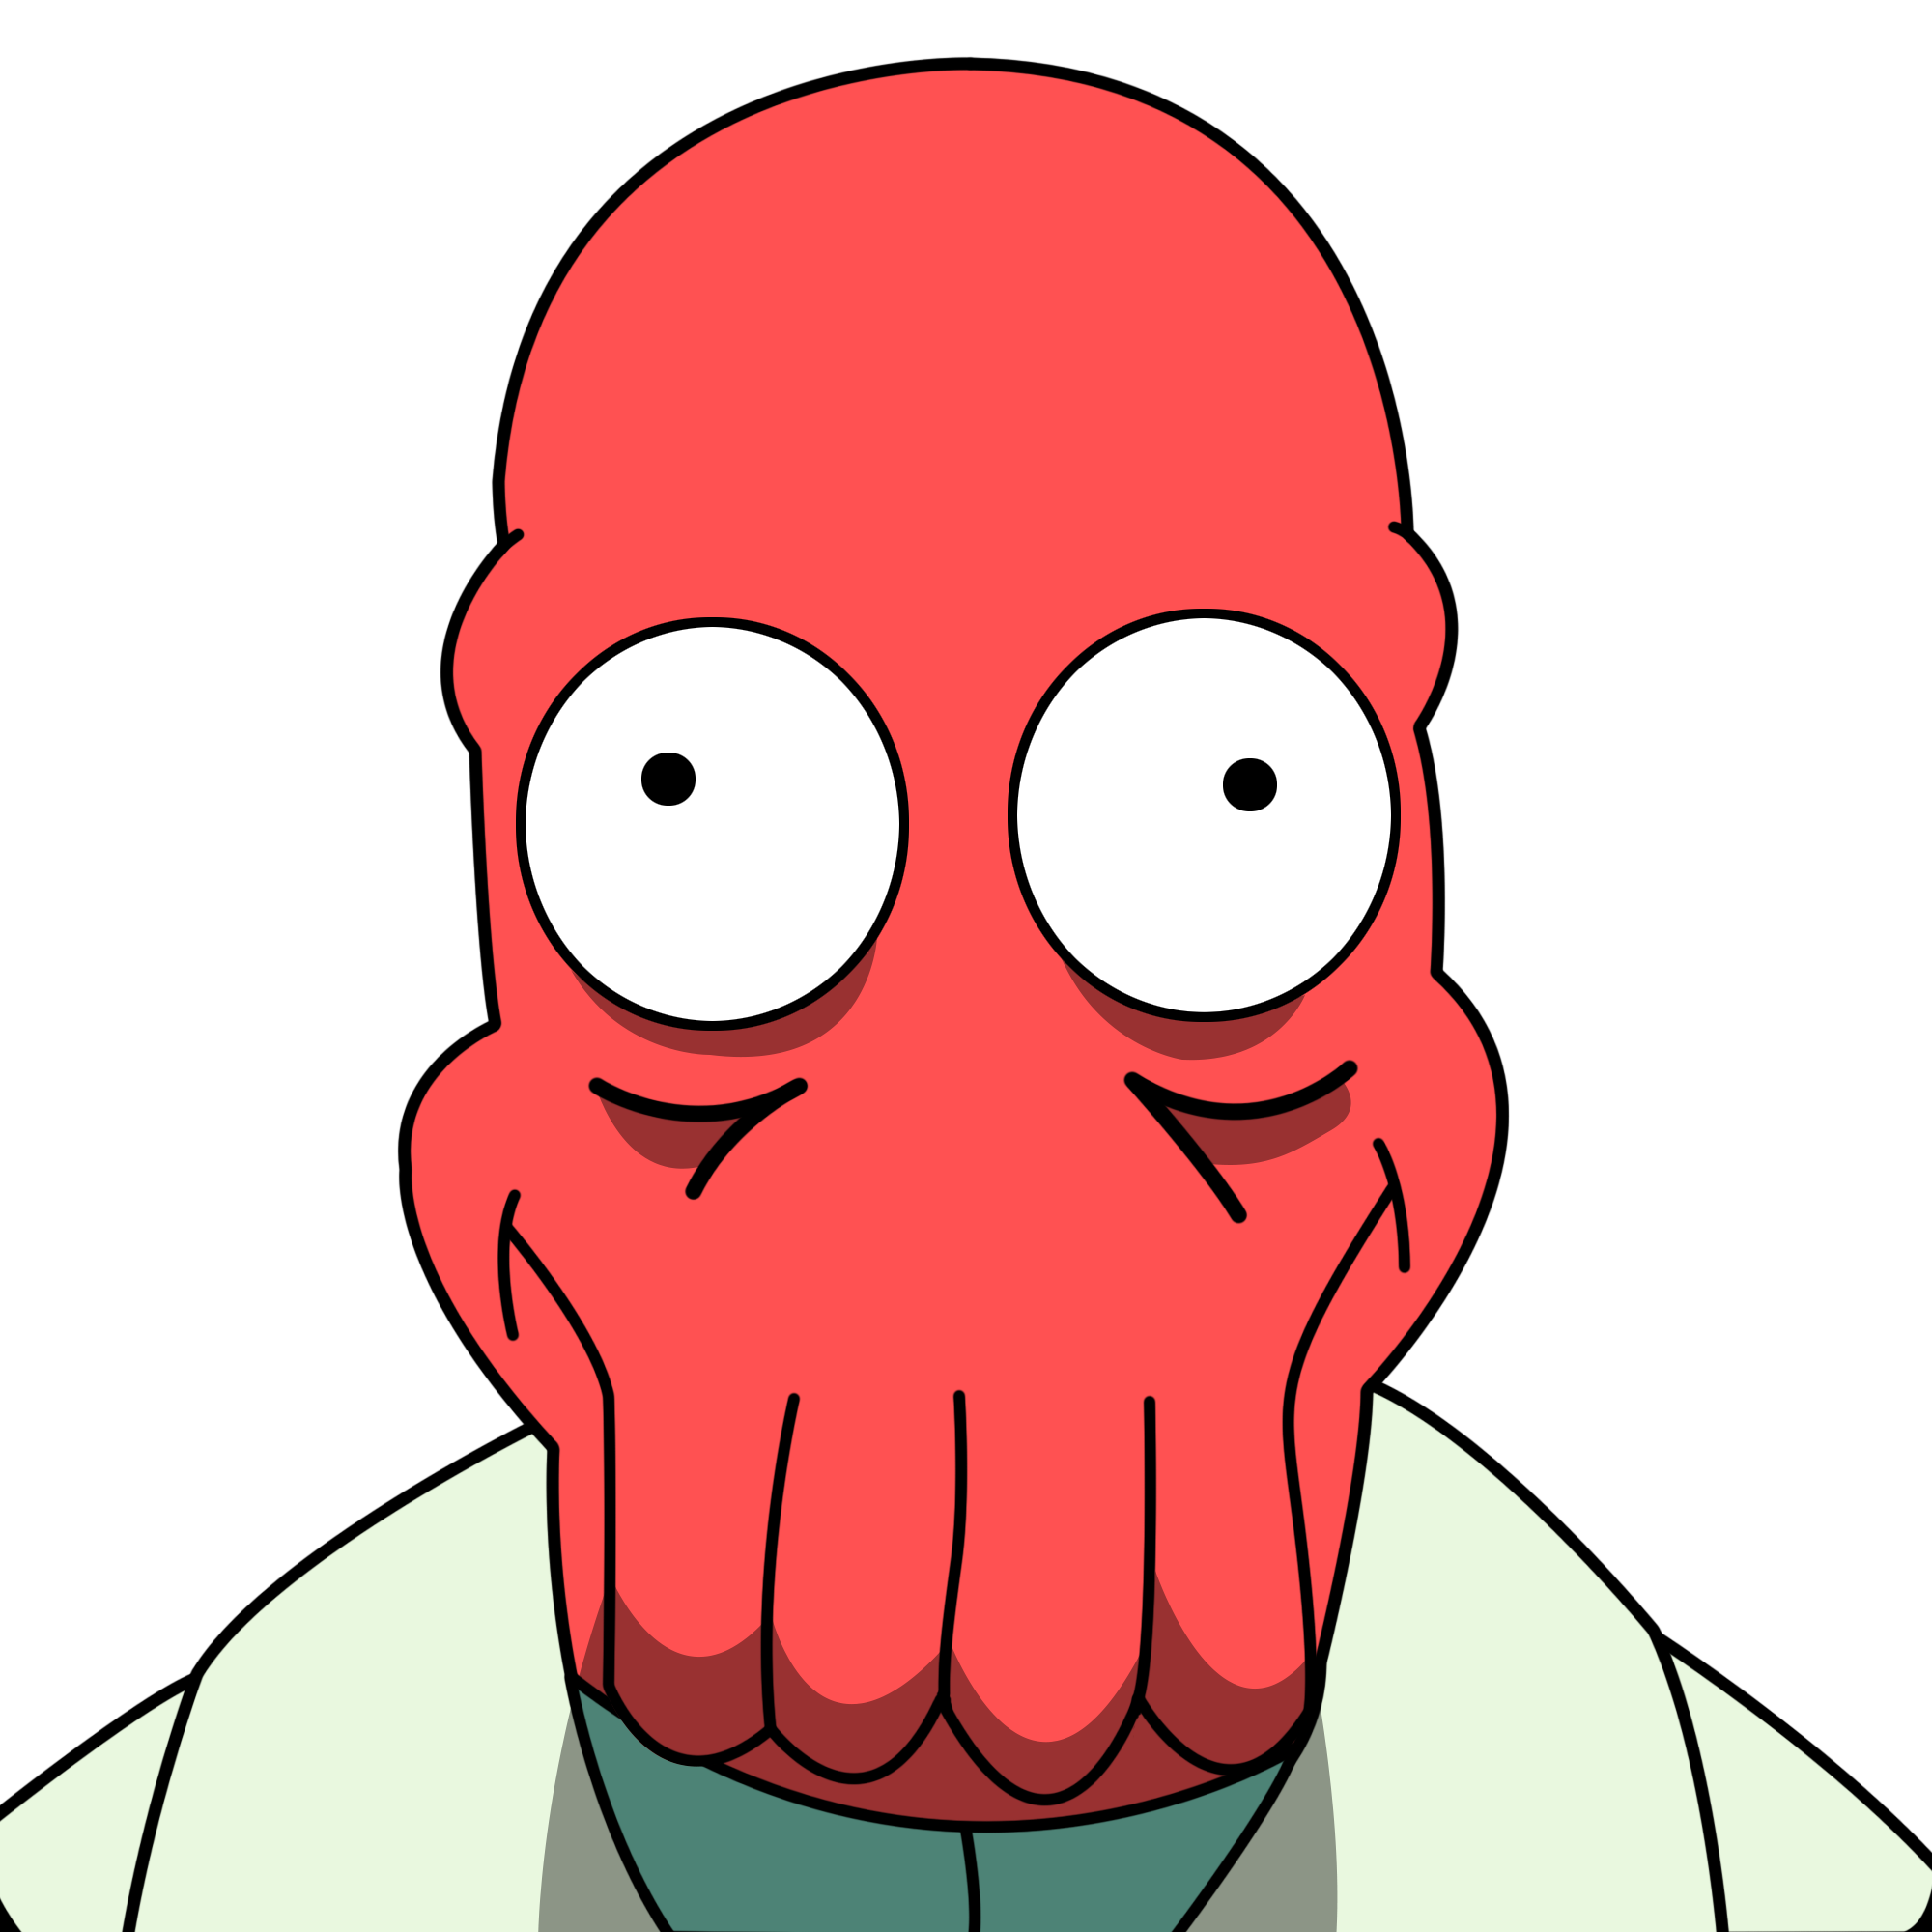 zoidberg_trace_by_deepfry3-d4y0wlc.png